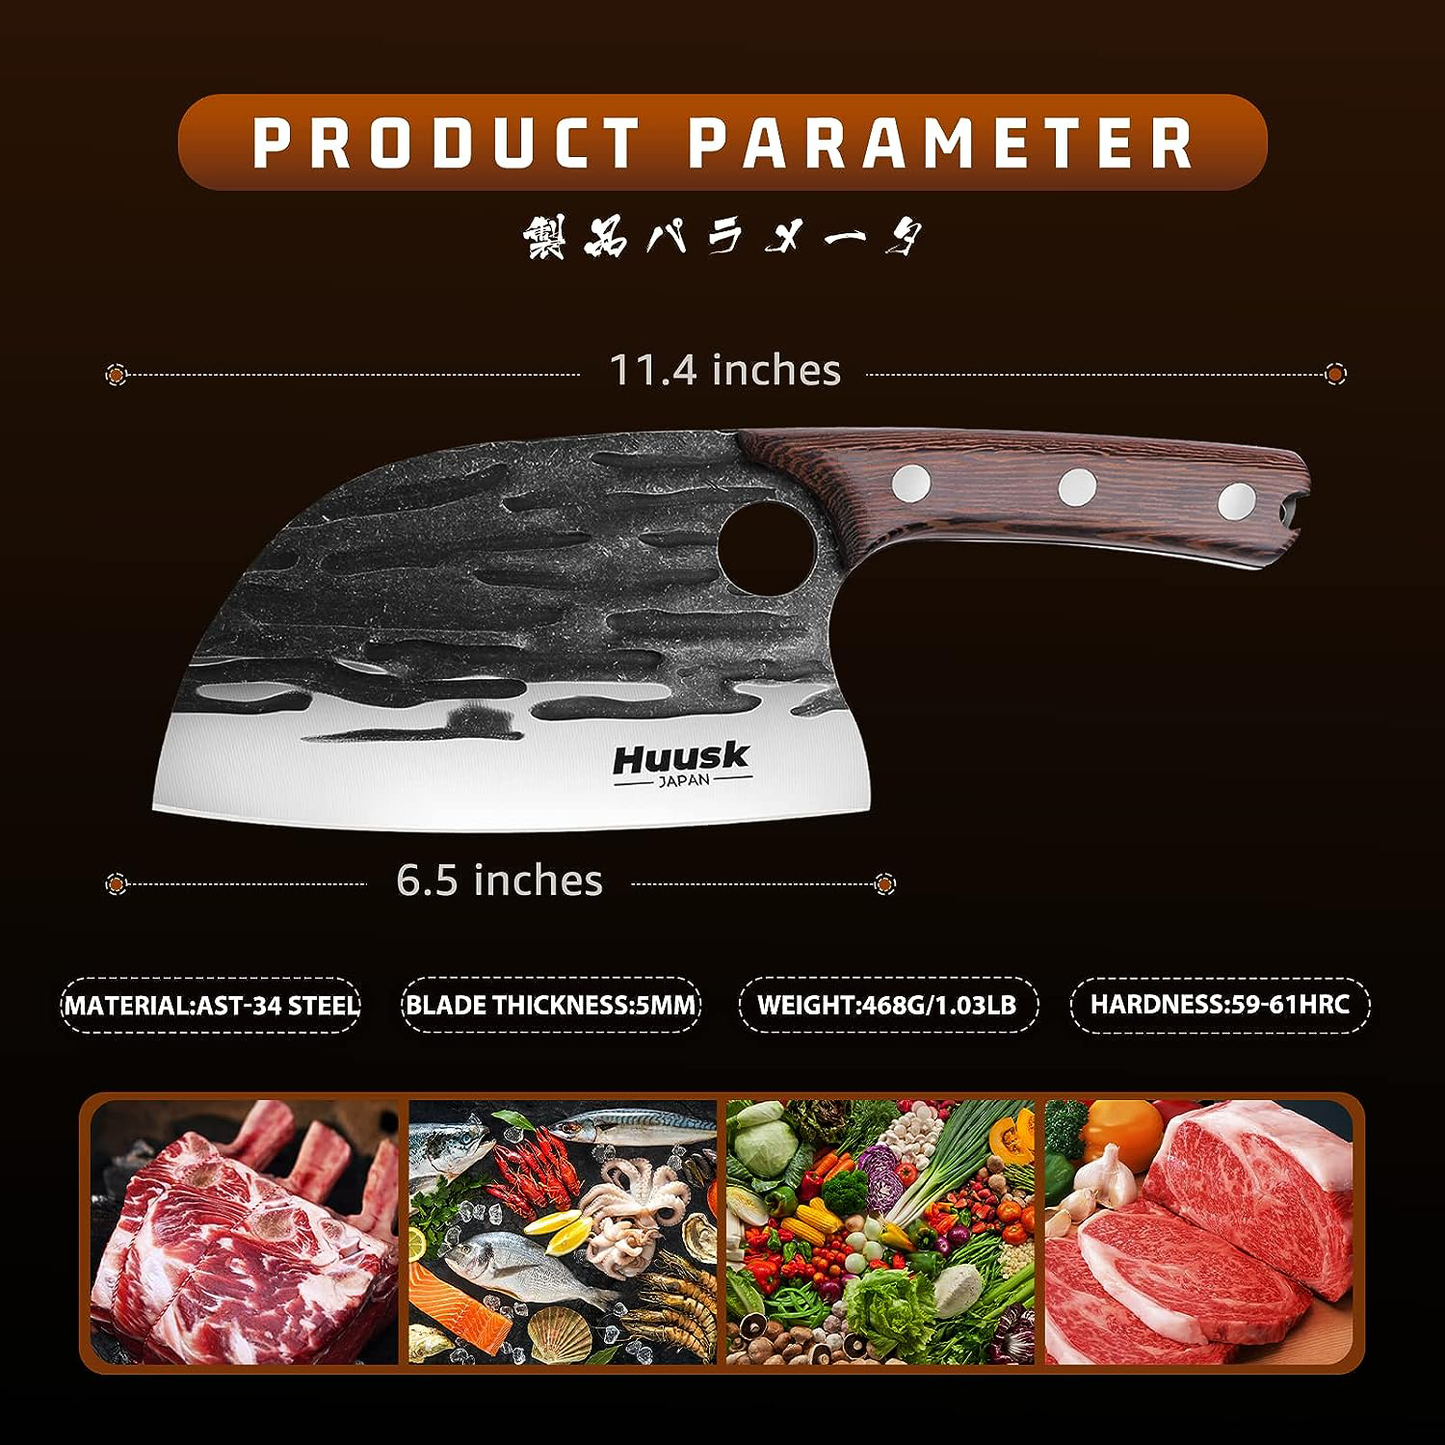 ENOKING Serbian Chef Knife Review  Meat Cleaver Forged Butcher Knife 